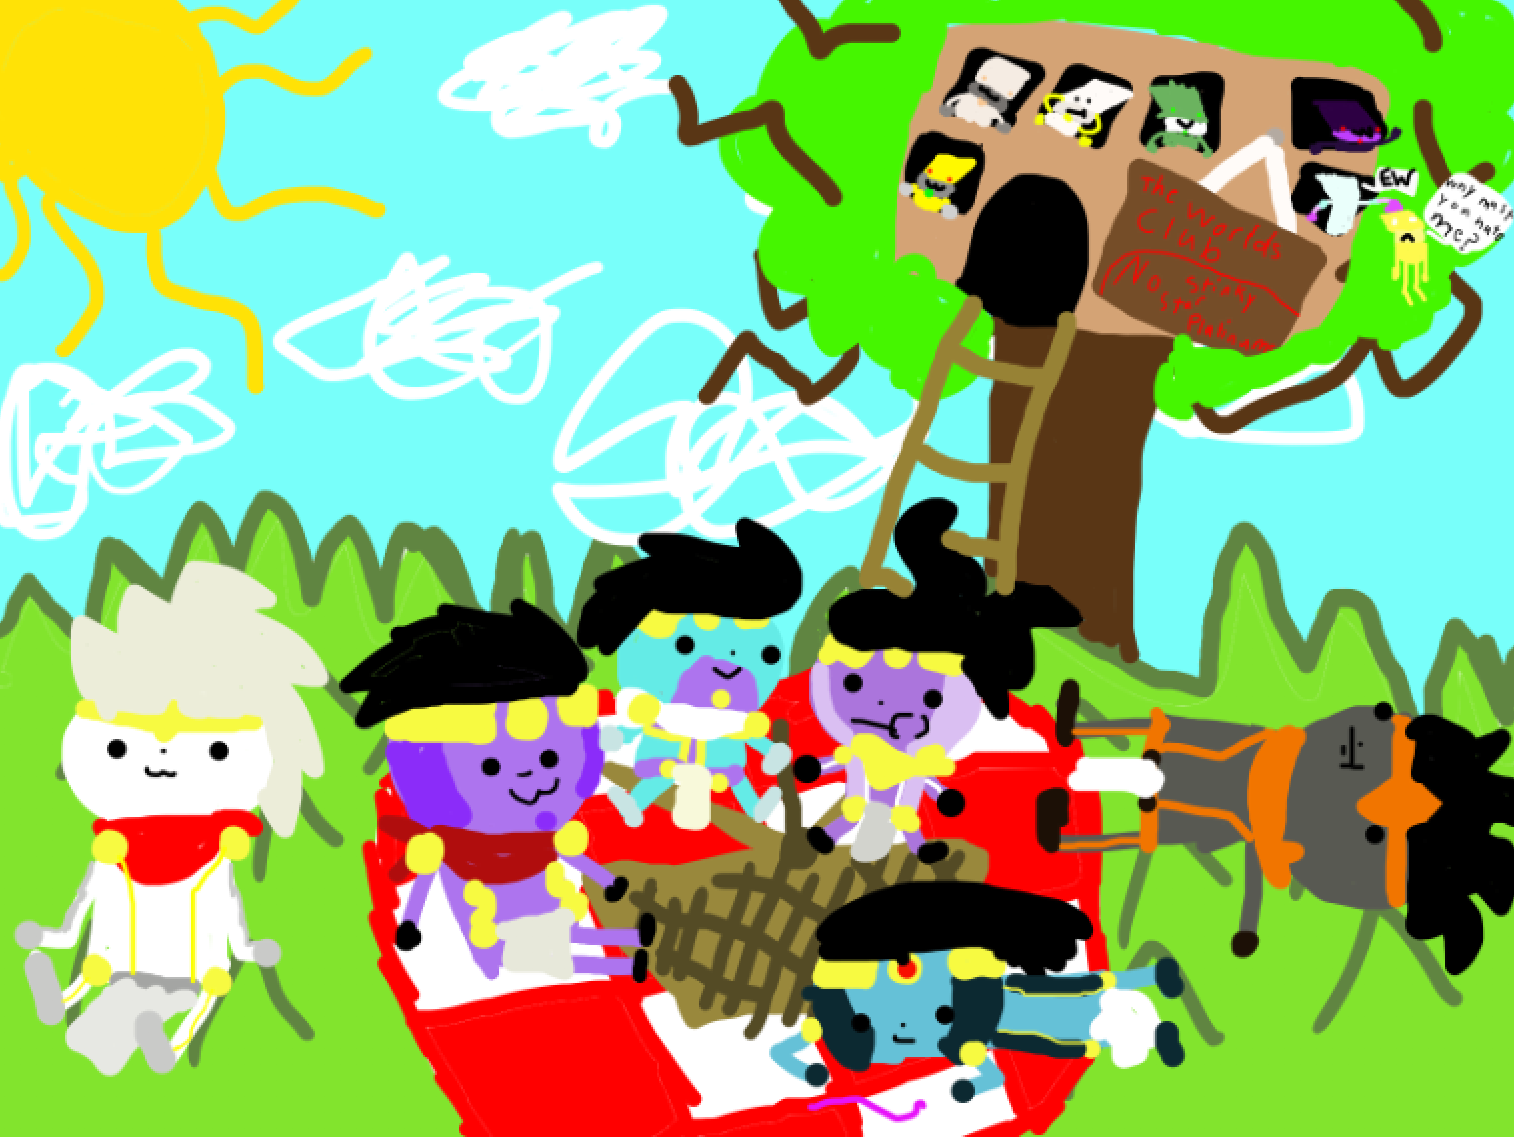 Here S The Second Most Voted Drawing The Star Platinum Picnic More On The Way Fandom - star platinum a bizarre day roblox wiki fandom